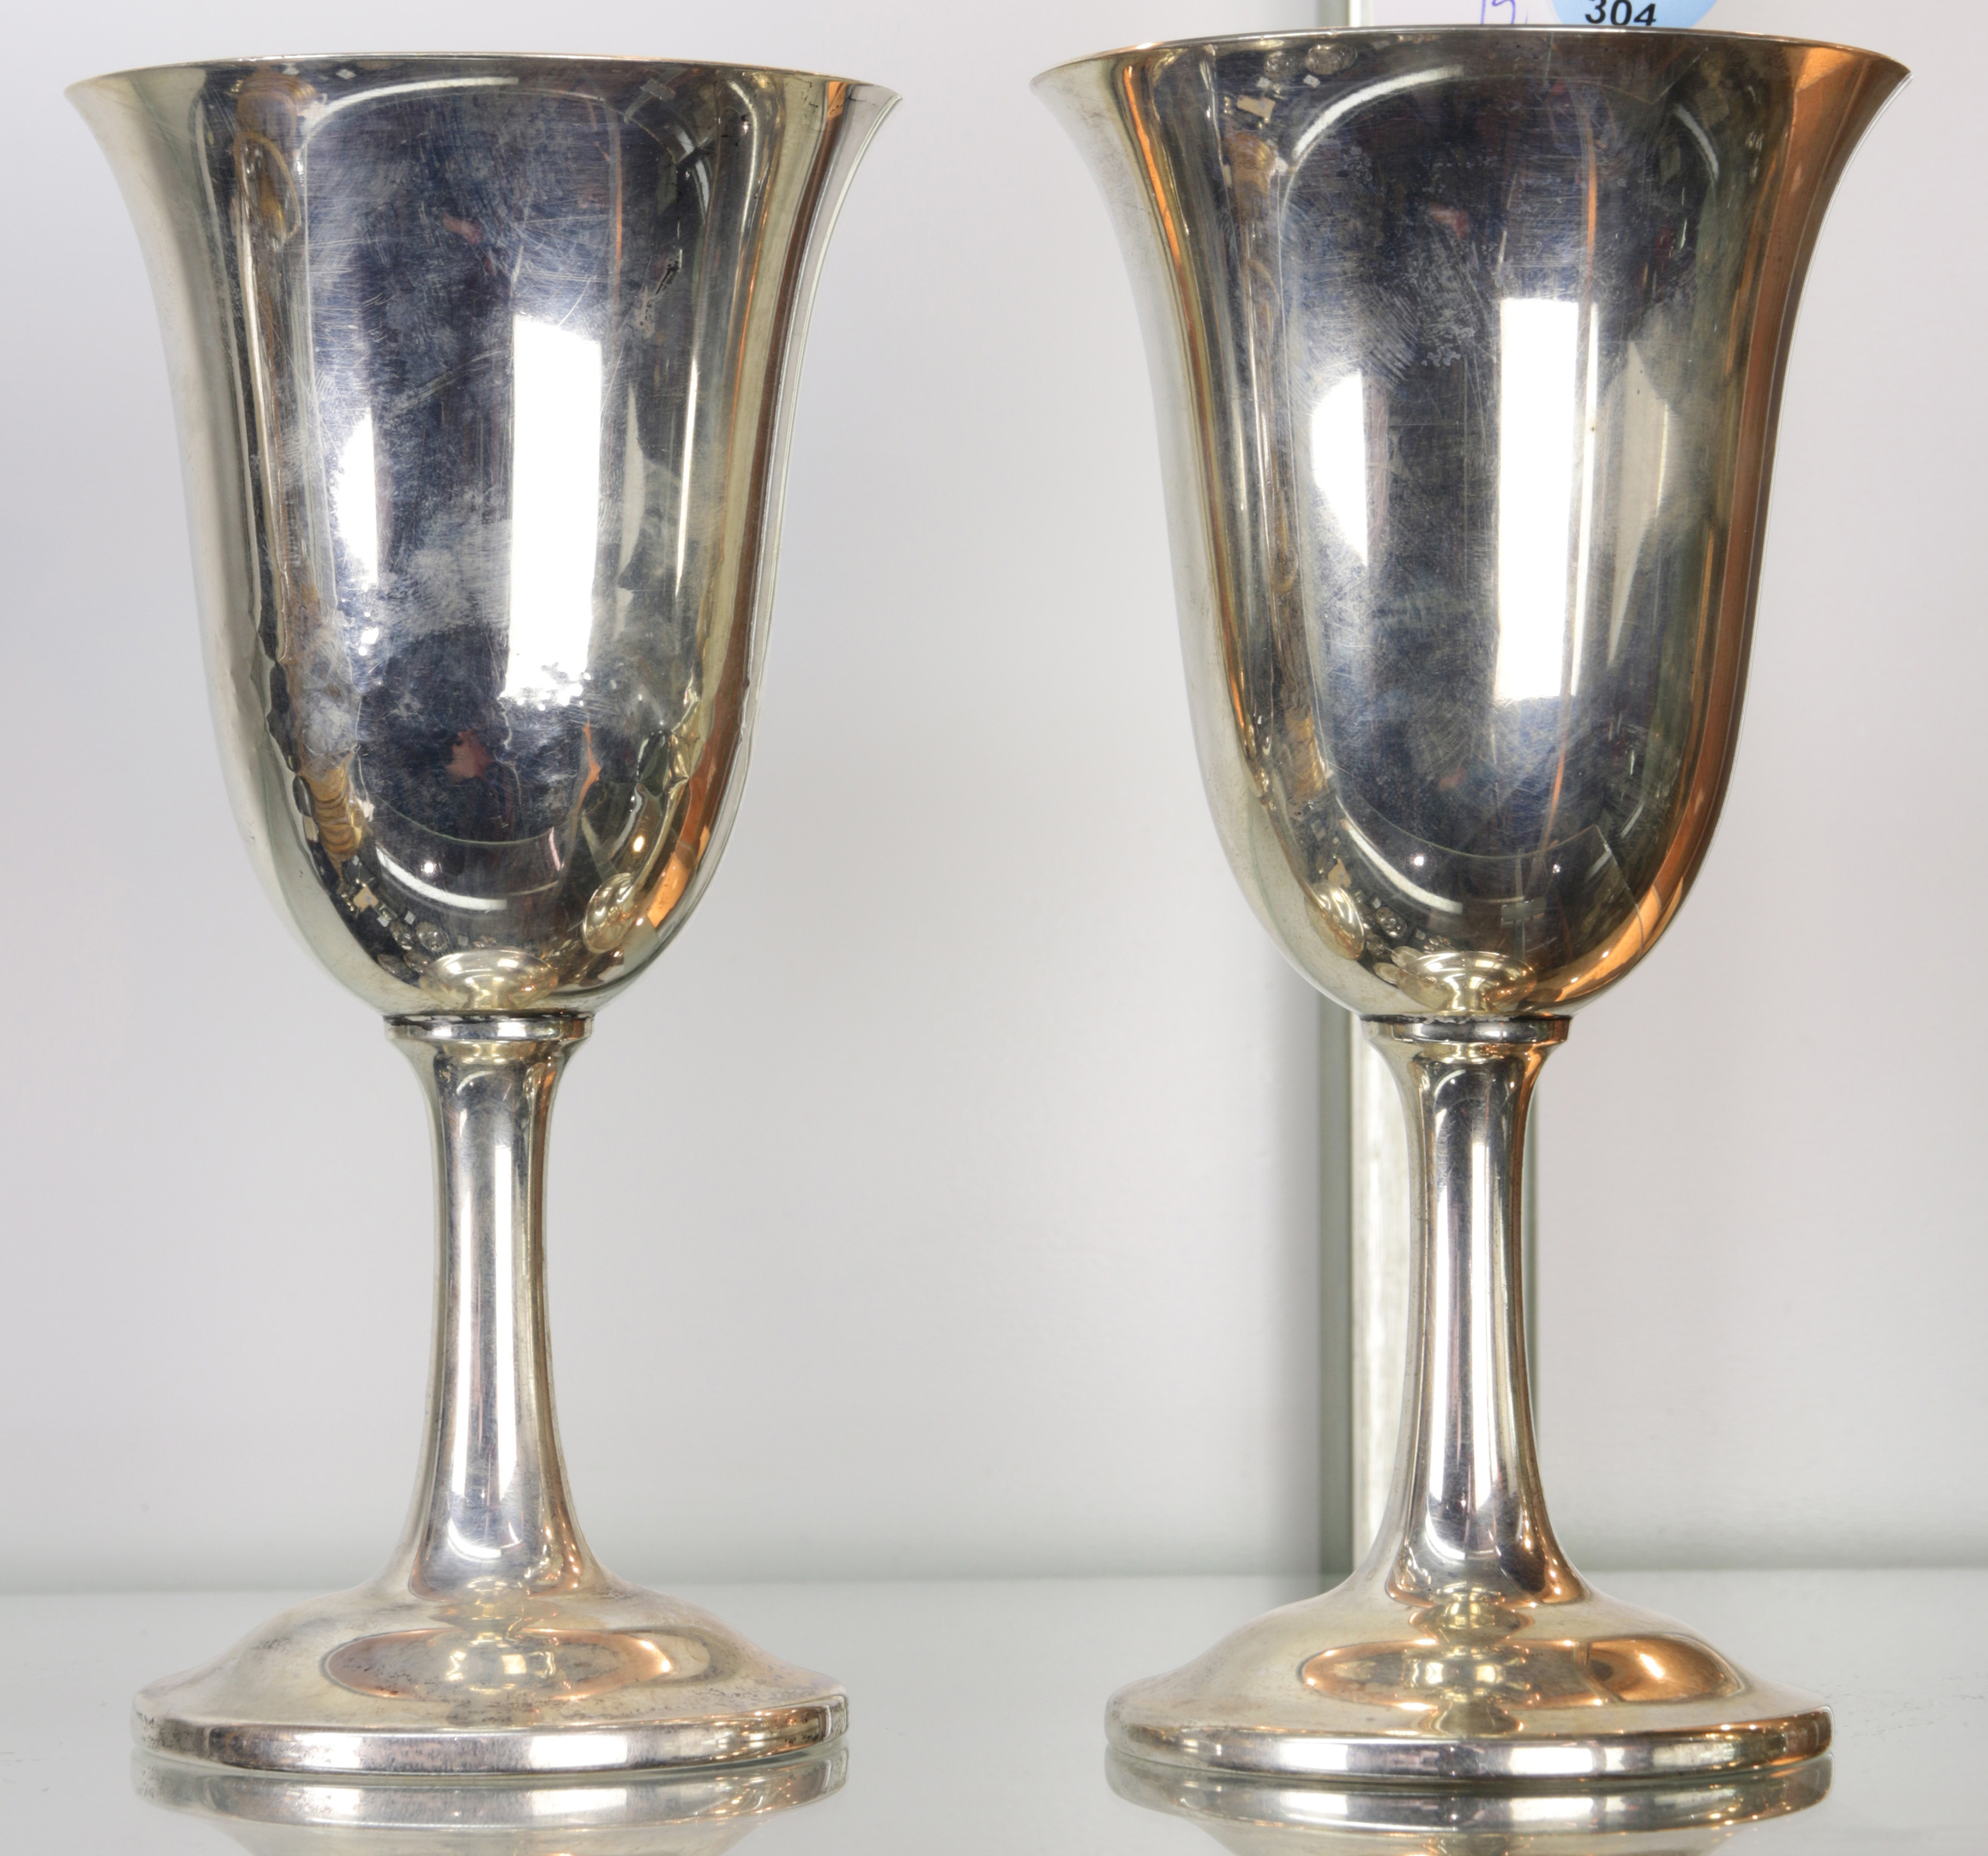  LOT OF 2 WALLACE STERLING CHALICES 3a6af7